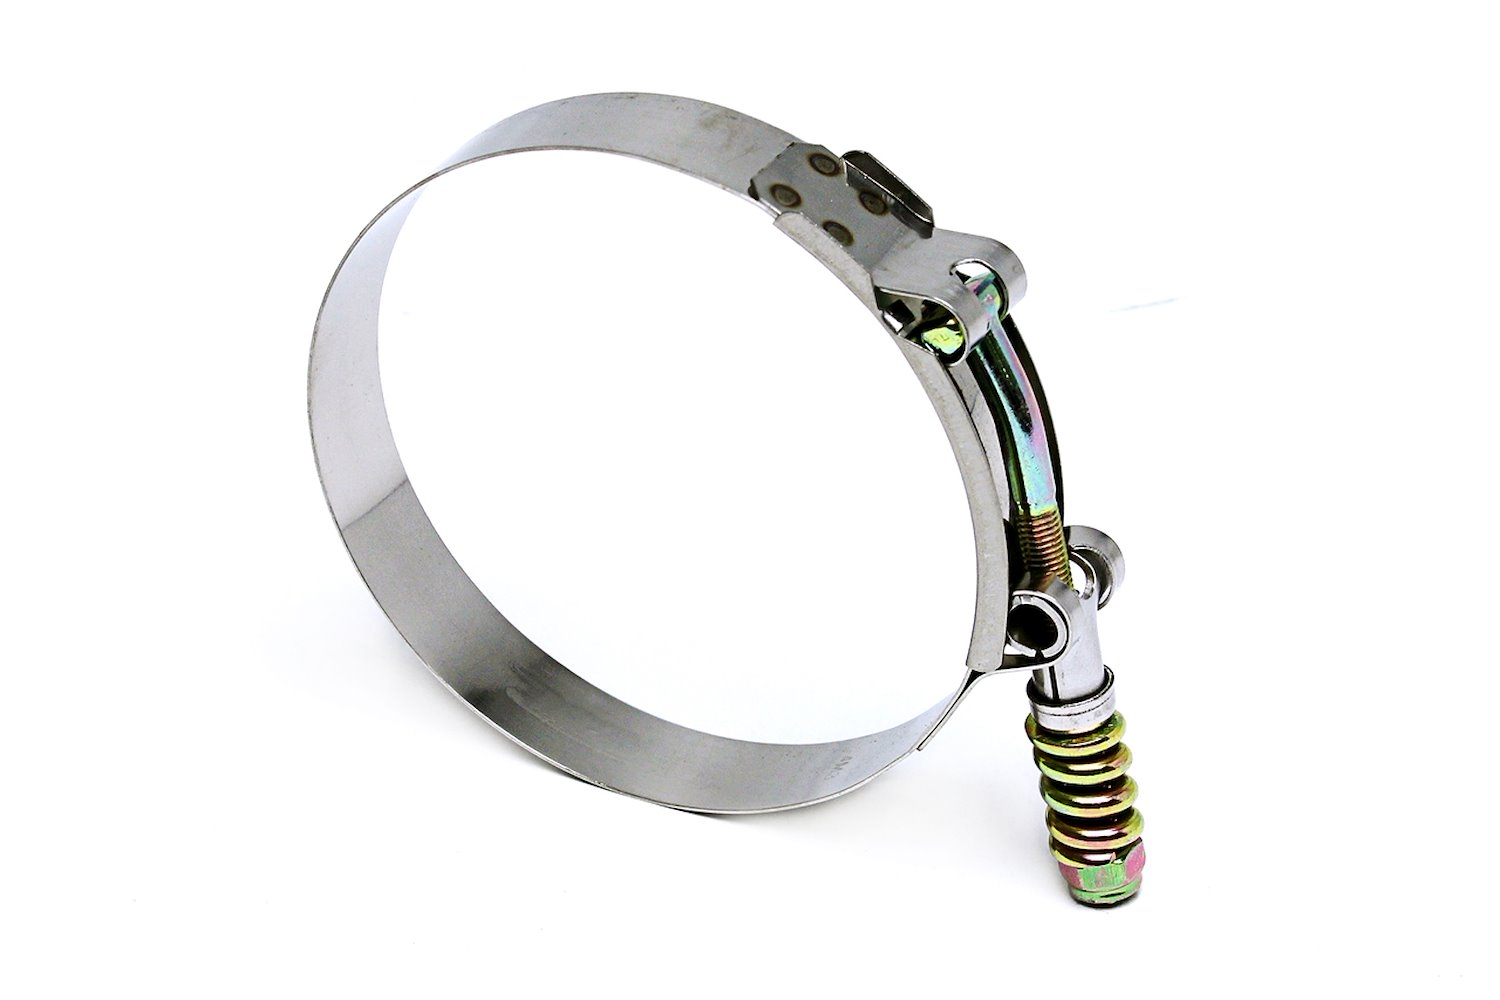 SLTC-575 Stainless Steel Spring Loaded T-Bolt Hose Clamp, Size #156, Range: 5.75 in.-6.06 in.